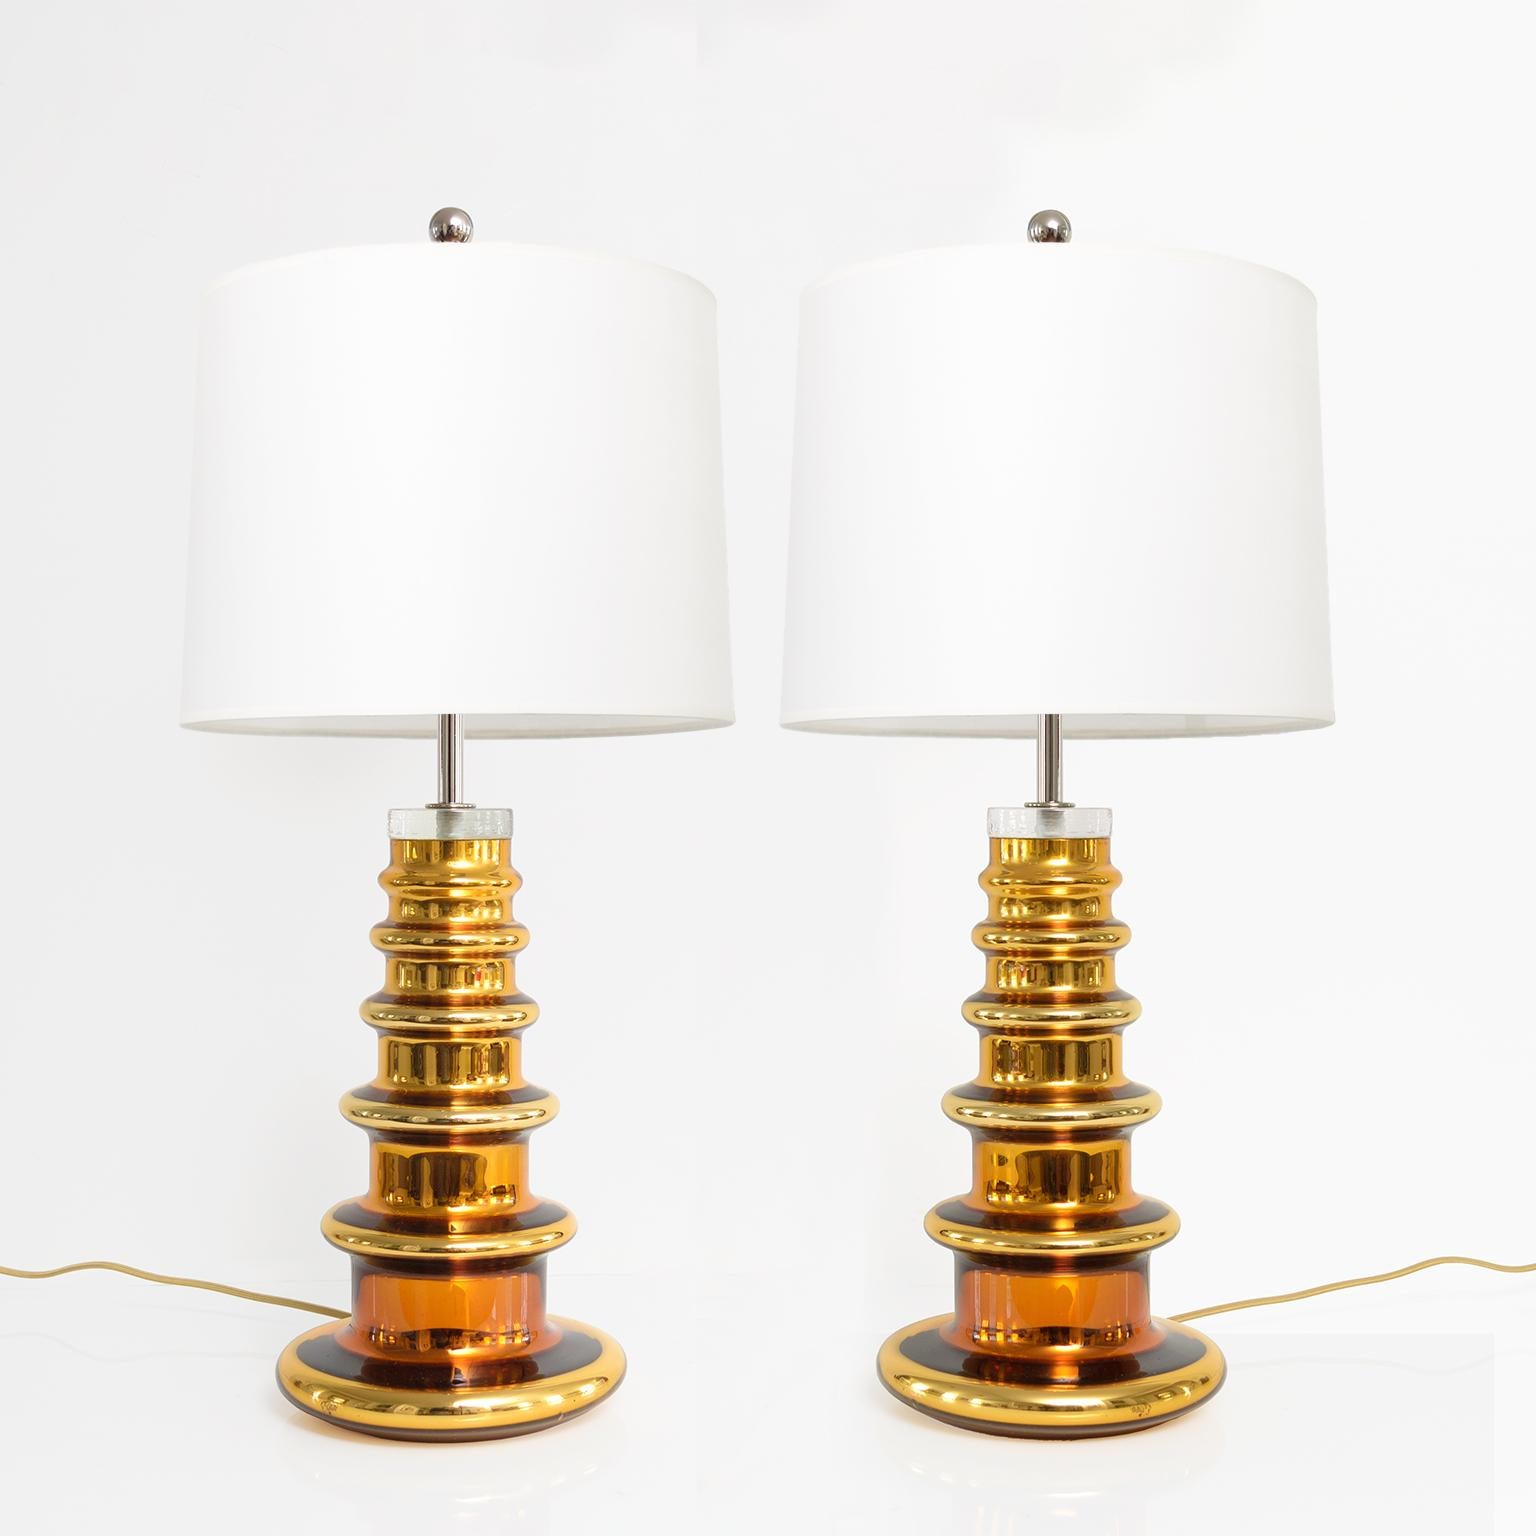 Johansfors pair of gold mercury glass lamps, Sweden. 1960. New chromed metal double clusters with standard base sockets and stem hardware. Newly wired for use in USA. Shades not included. 

Overall H: 26”-28